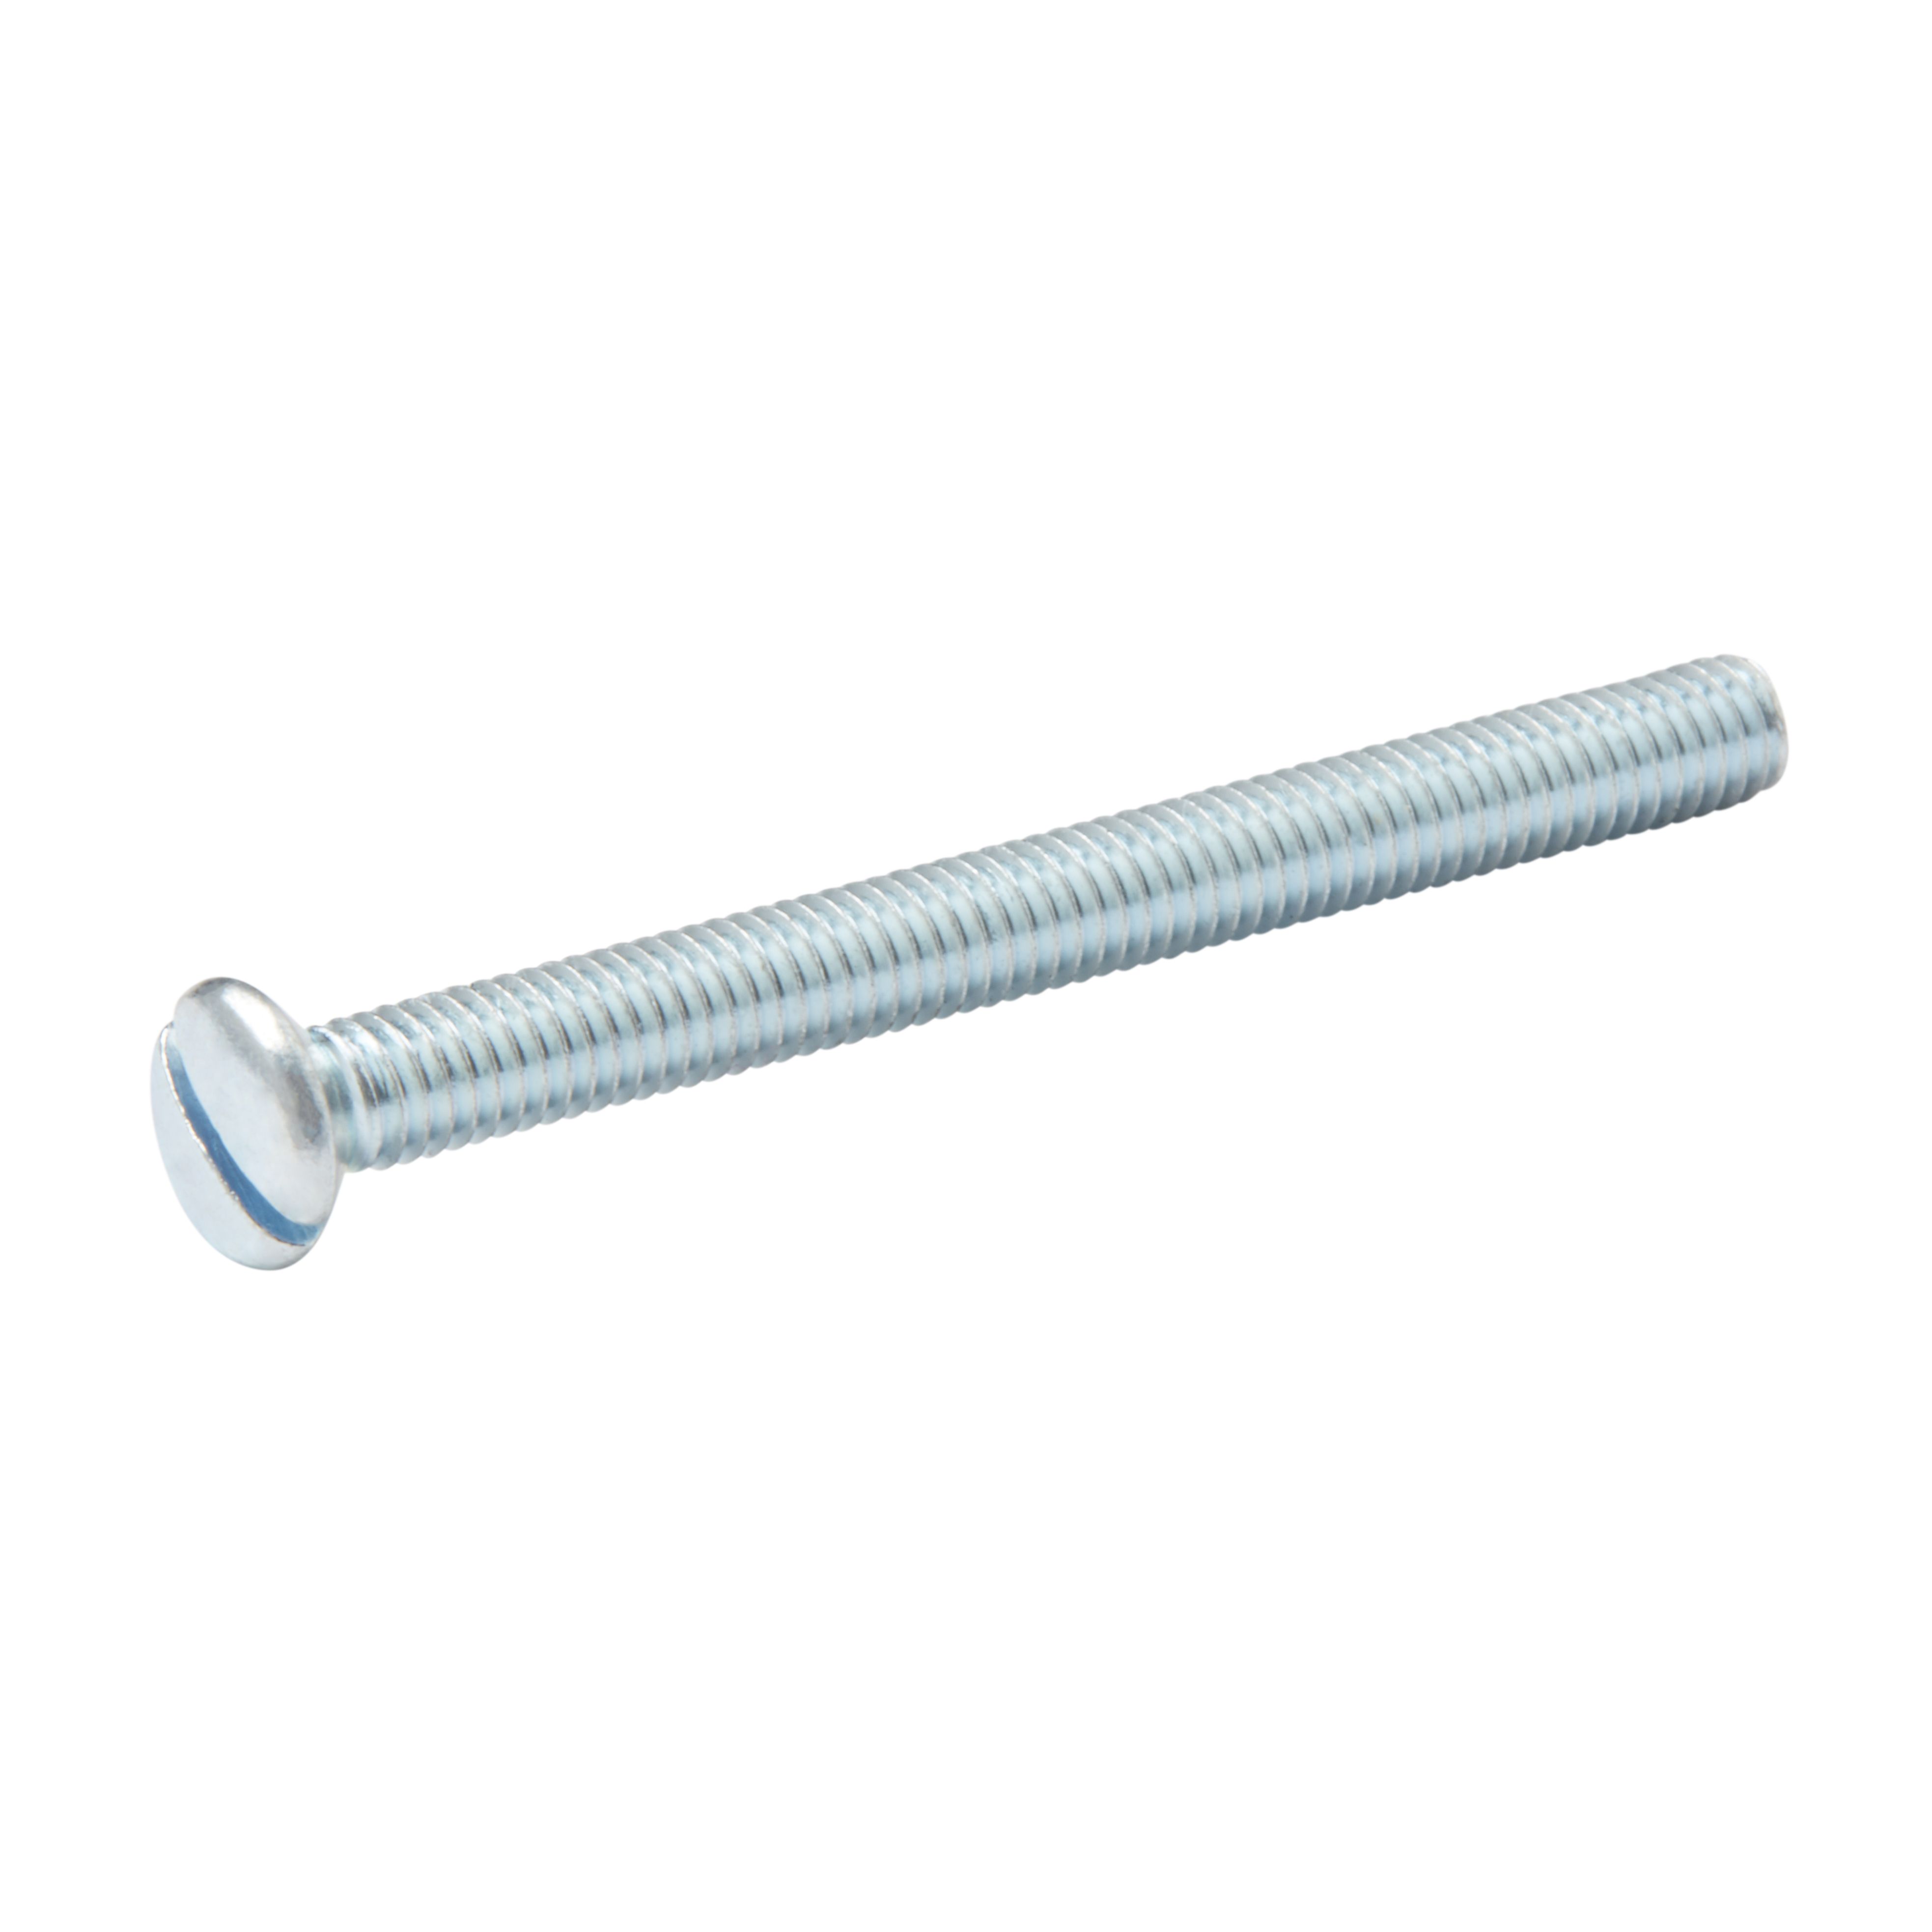 Diall Raised-countersunk Zinc-plated Carbon steel Switch box screw (Dia)3.5mm (L)40mm, Pack of 4